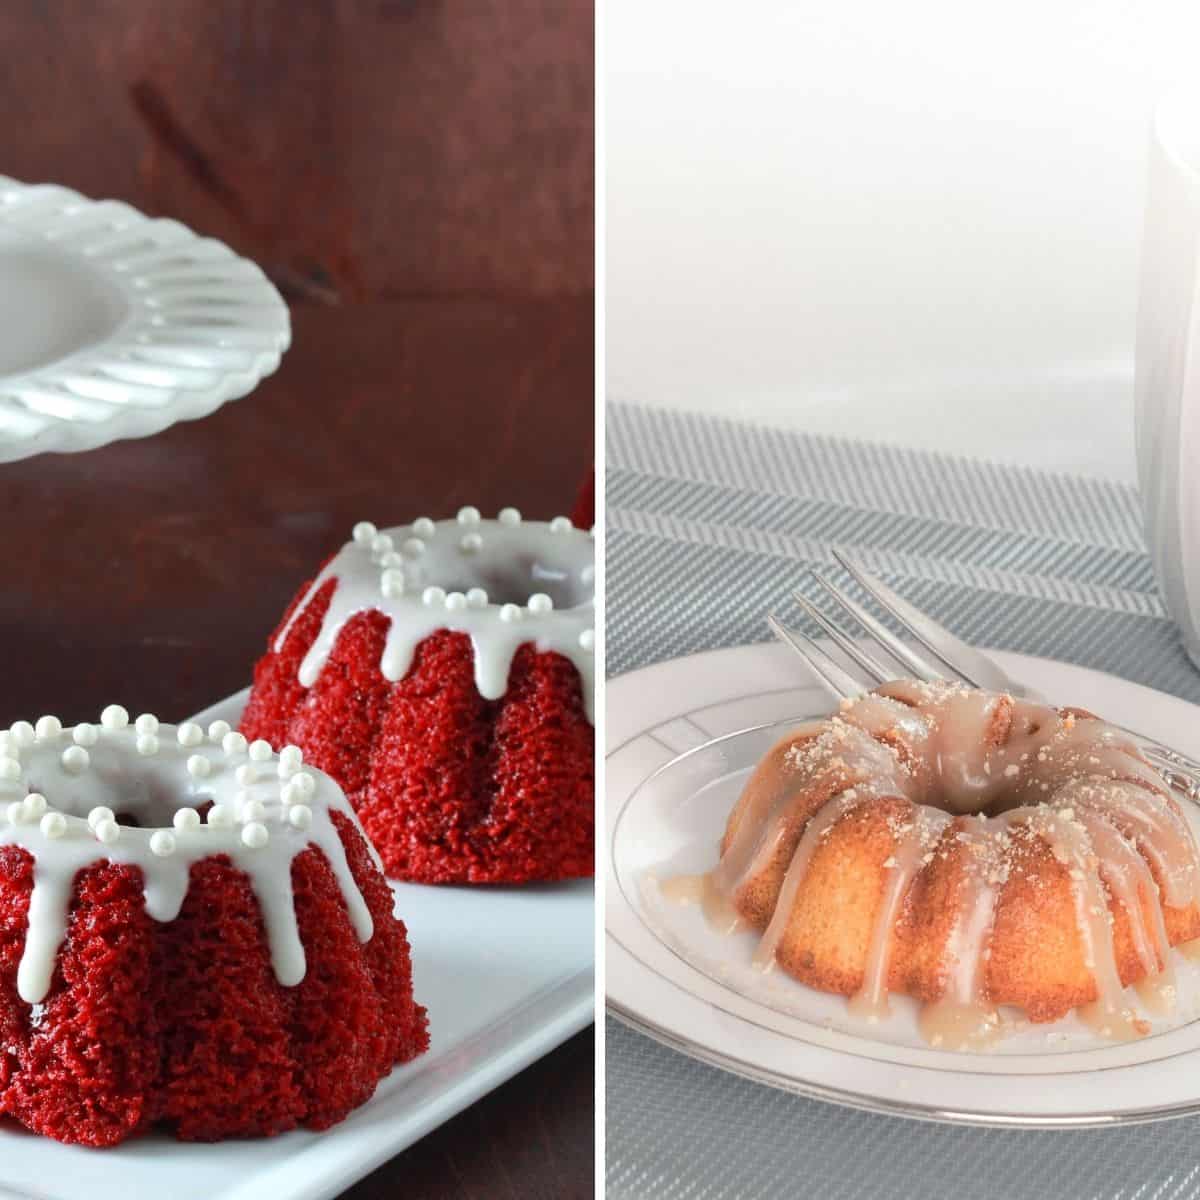 mini red velvet and mini carrot bundt cakes in a collage on a plate